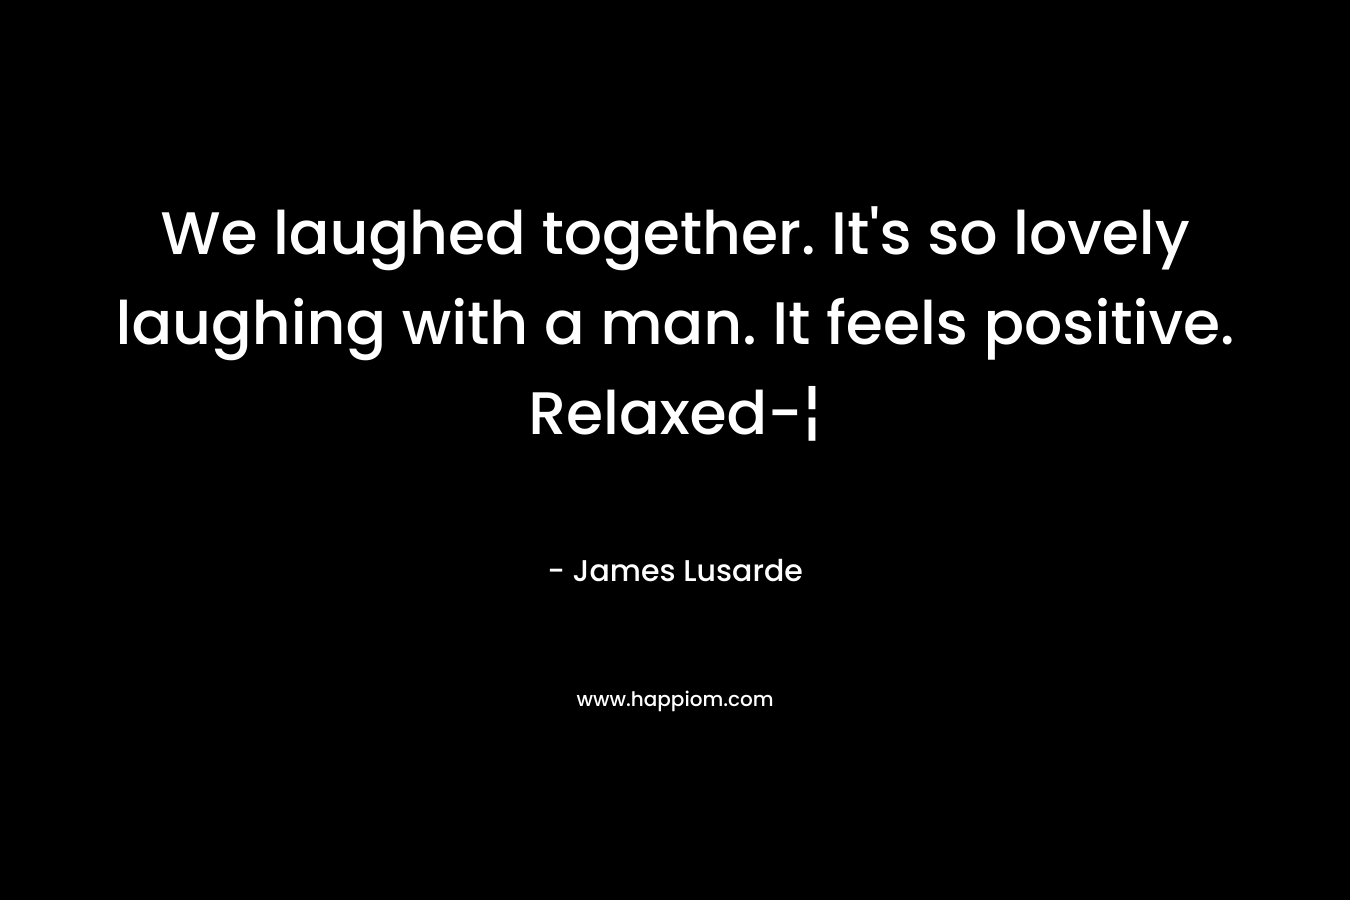 We laughed together. It's so lovely laughing with a man. It feels positive. Relaxed-¦